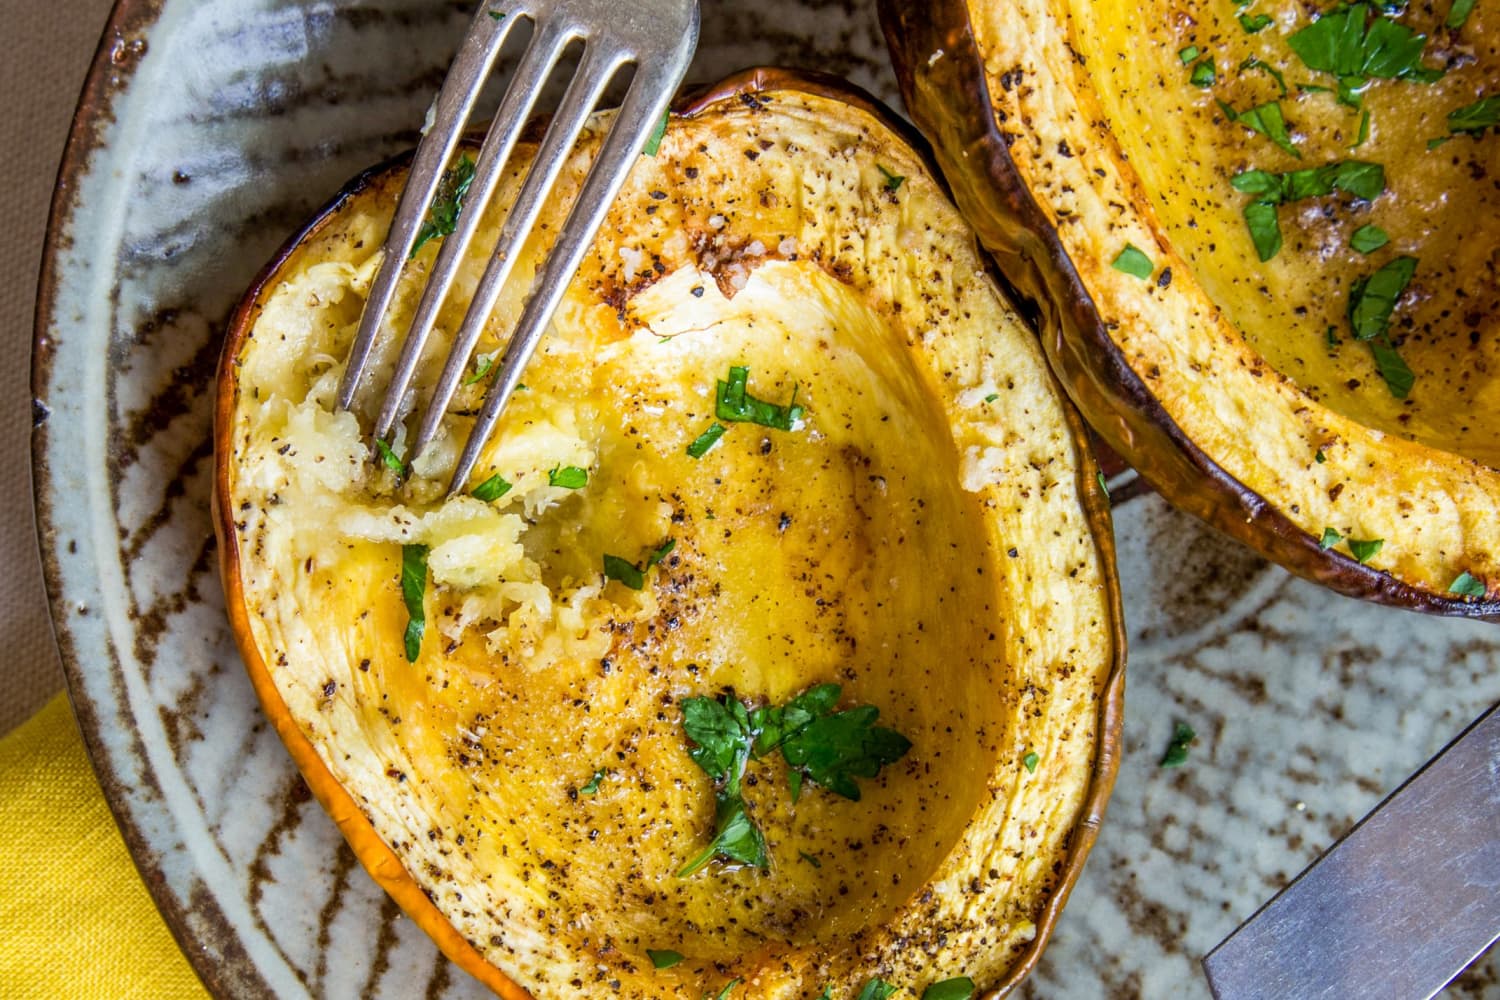 How To Cook Acorn Squash: The Easiest, Simplest Method